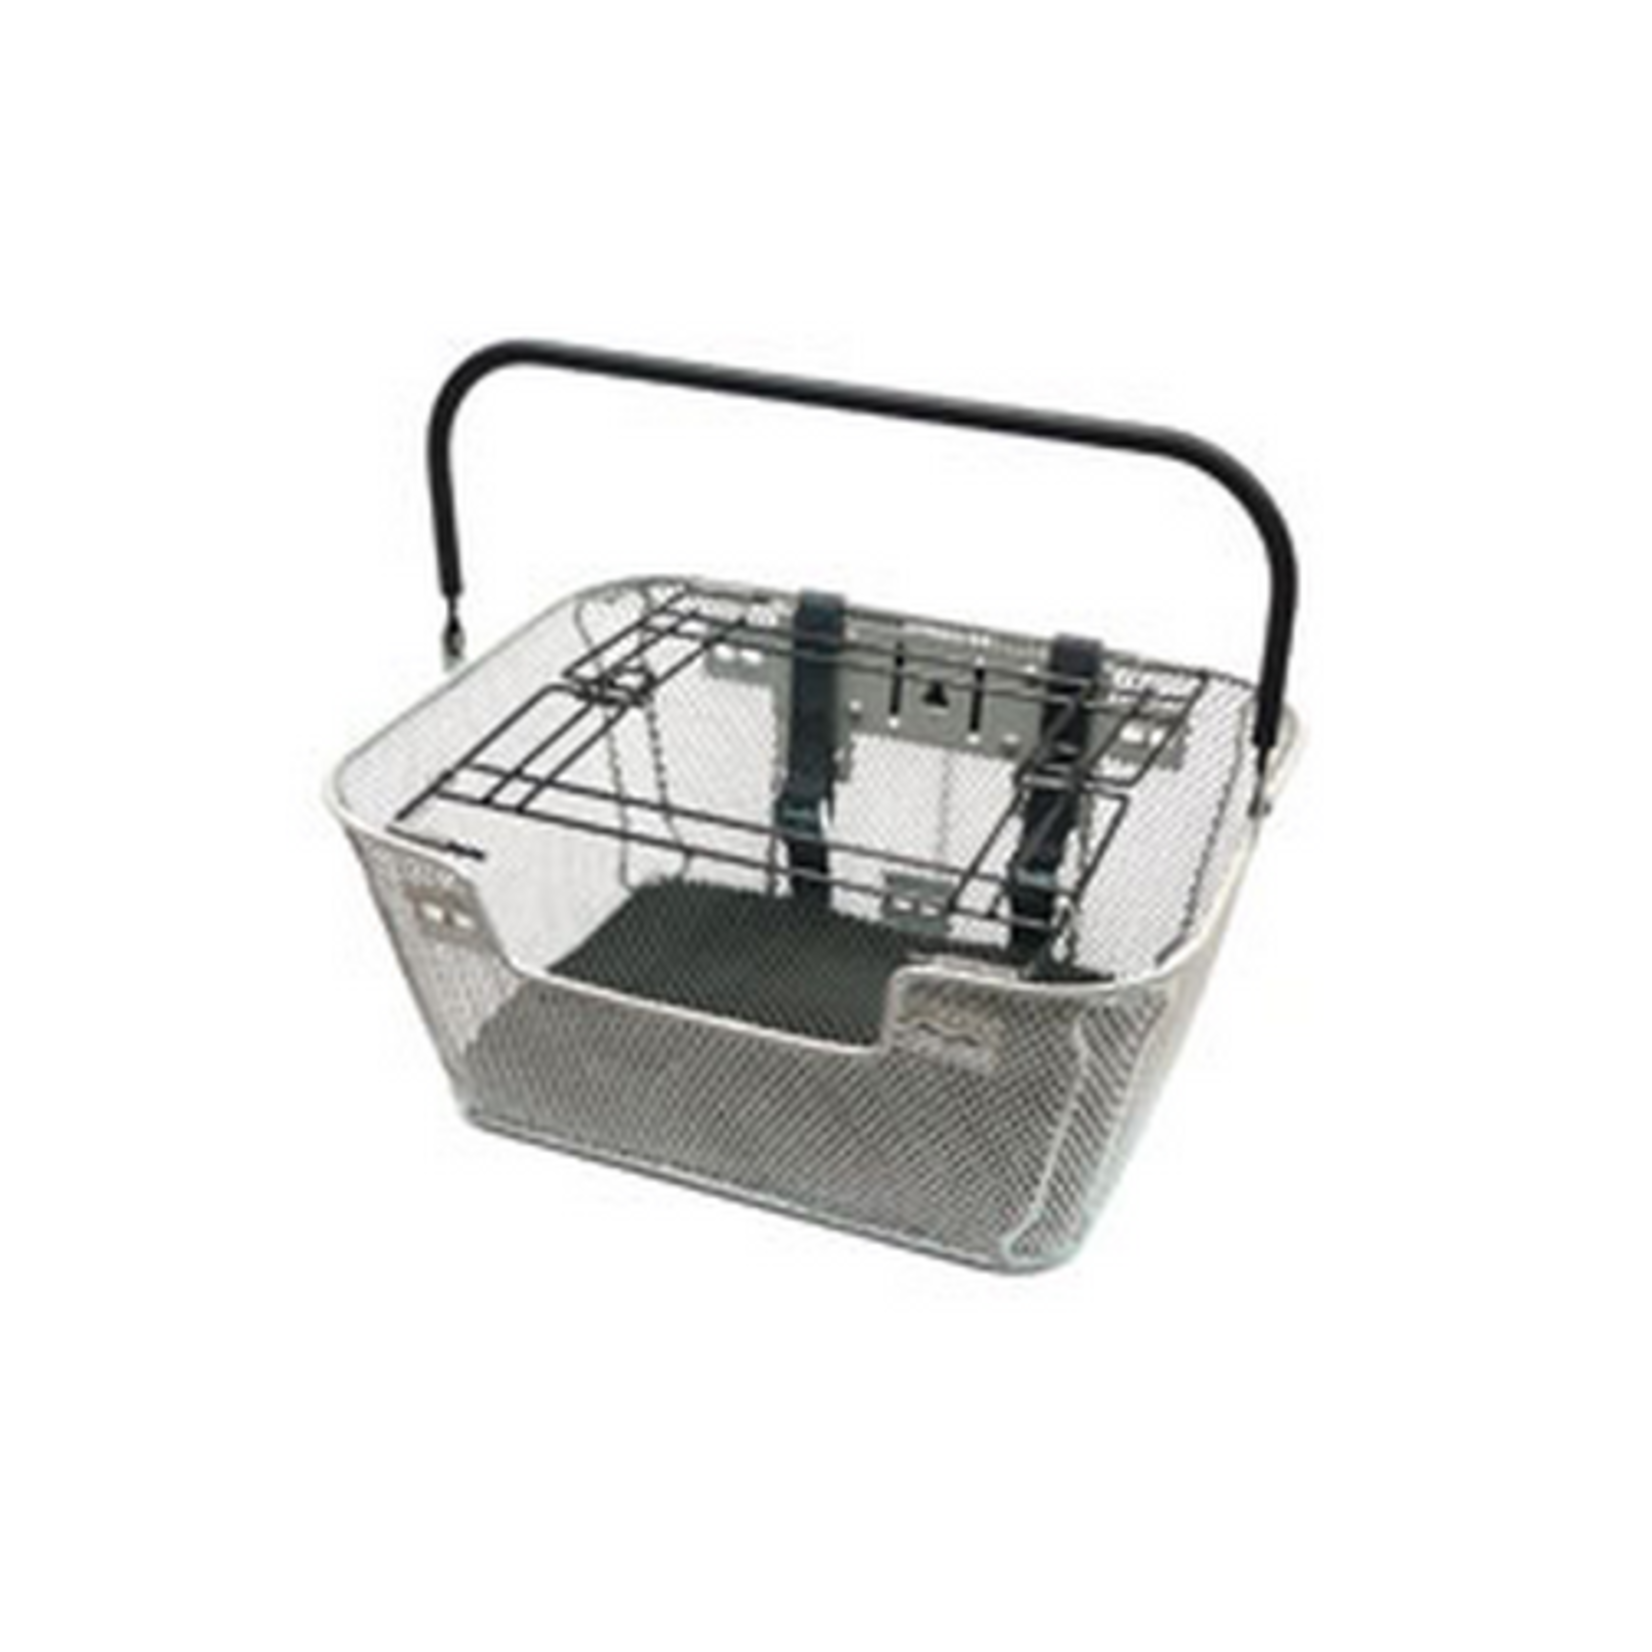 BASKET - Pet Carrier, Front, Fixed Base, Includes Spring Lid, Padded Base & Anchor Strap, 40cm x 30cm x 18cm